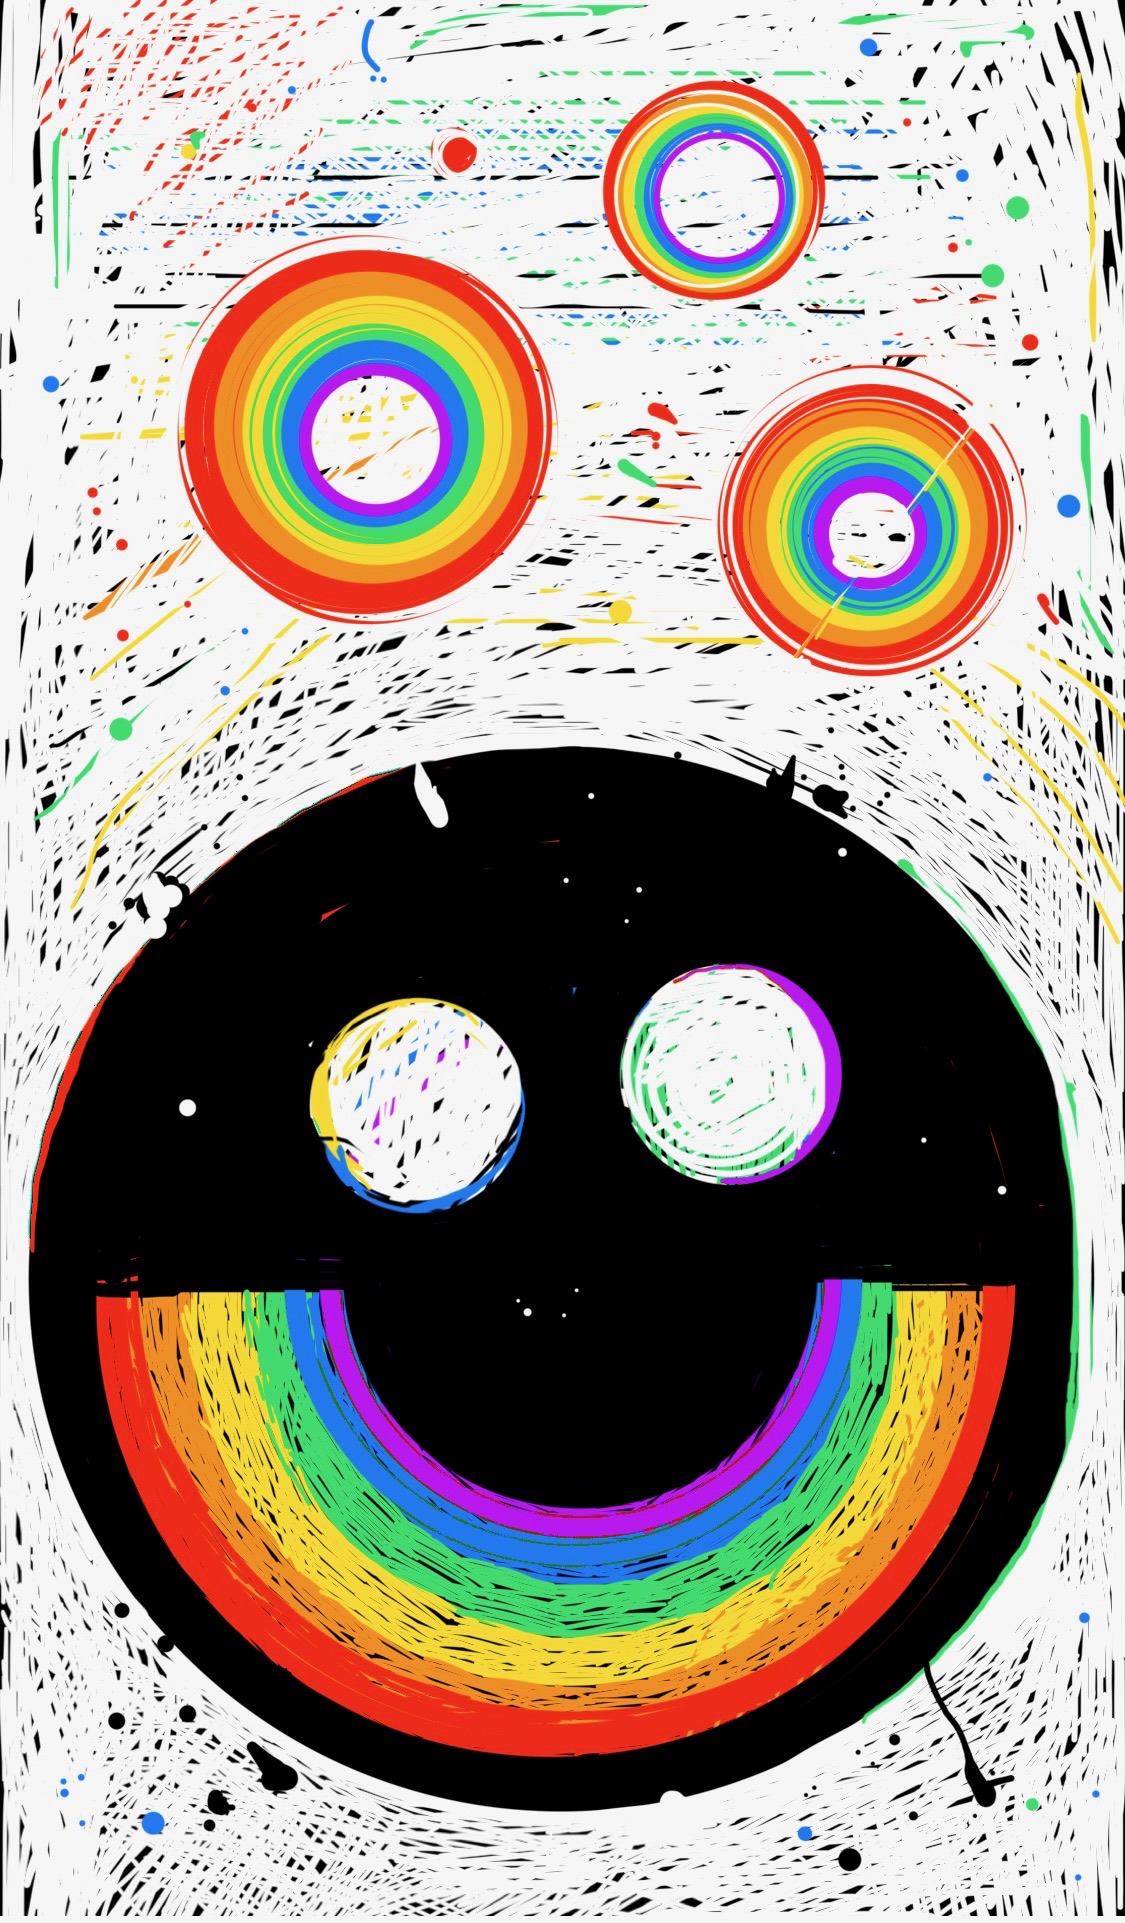 A smiley face where the mouth is a rainbow, accompanied by other rainbows